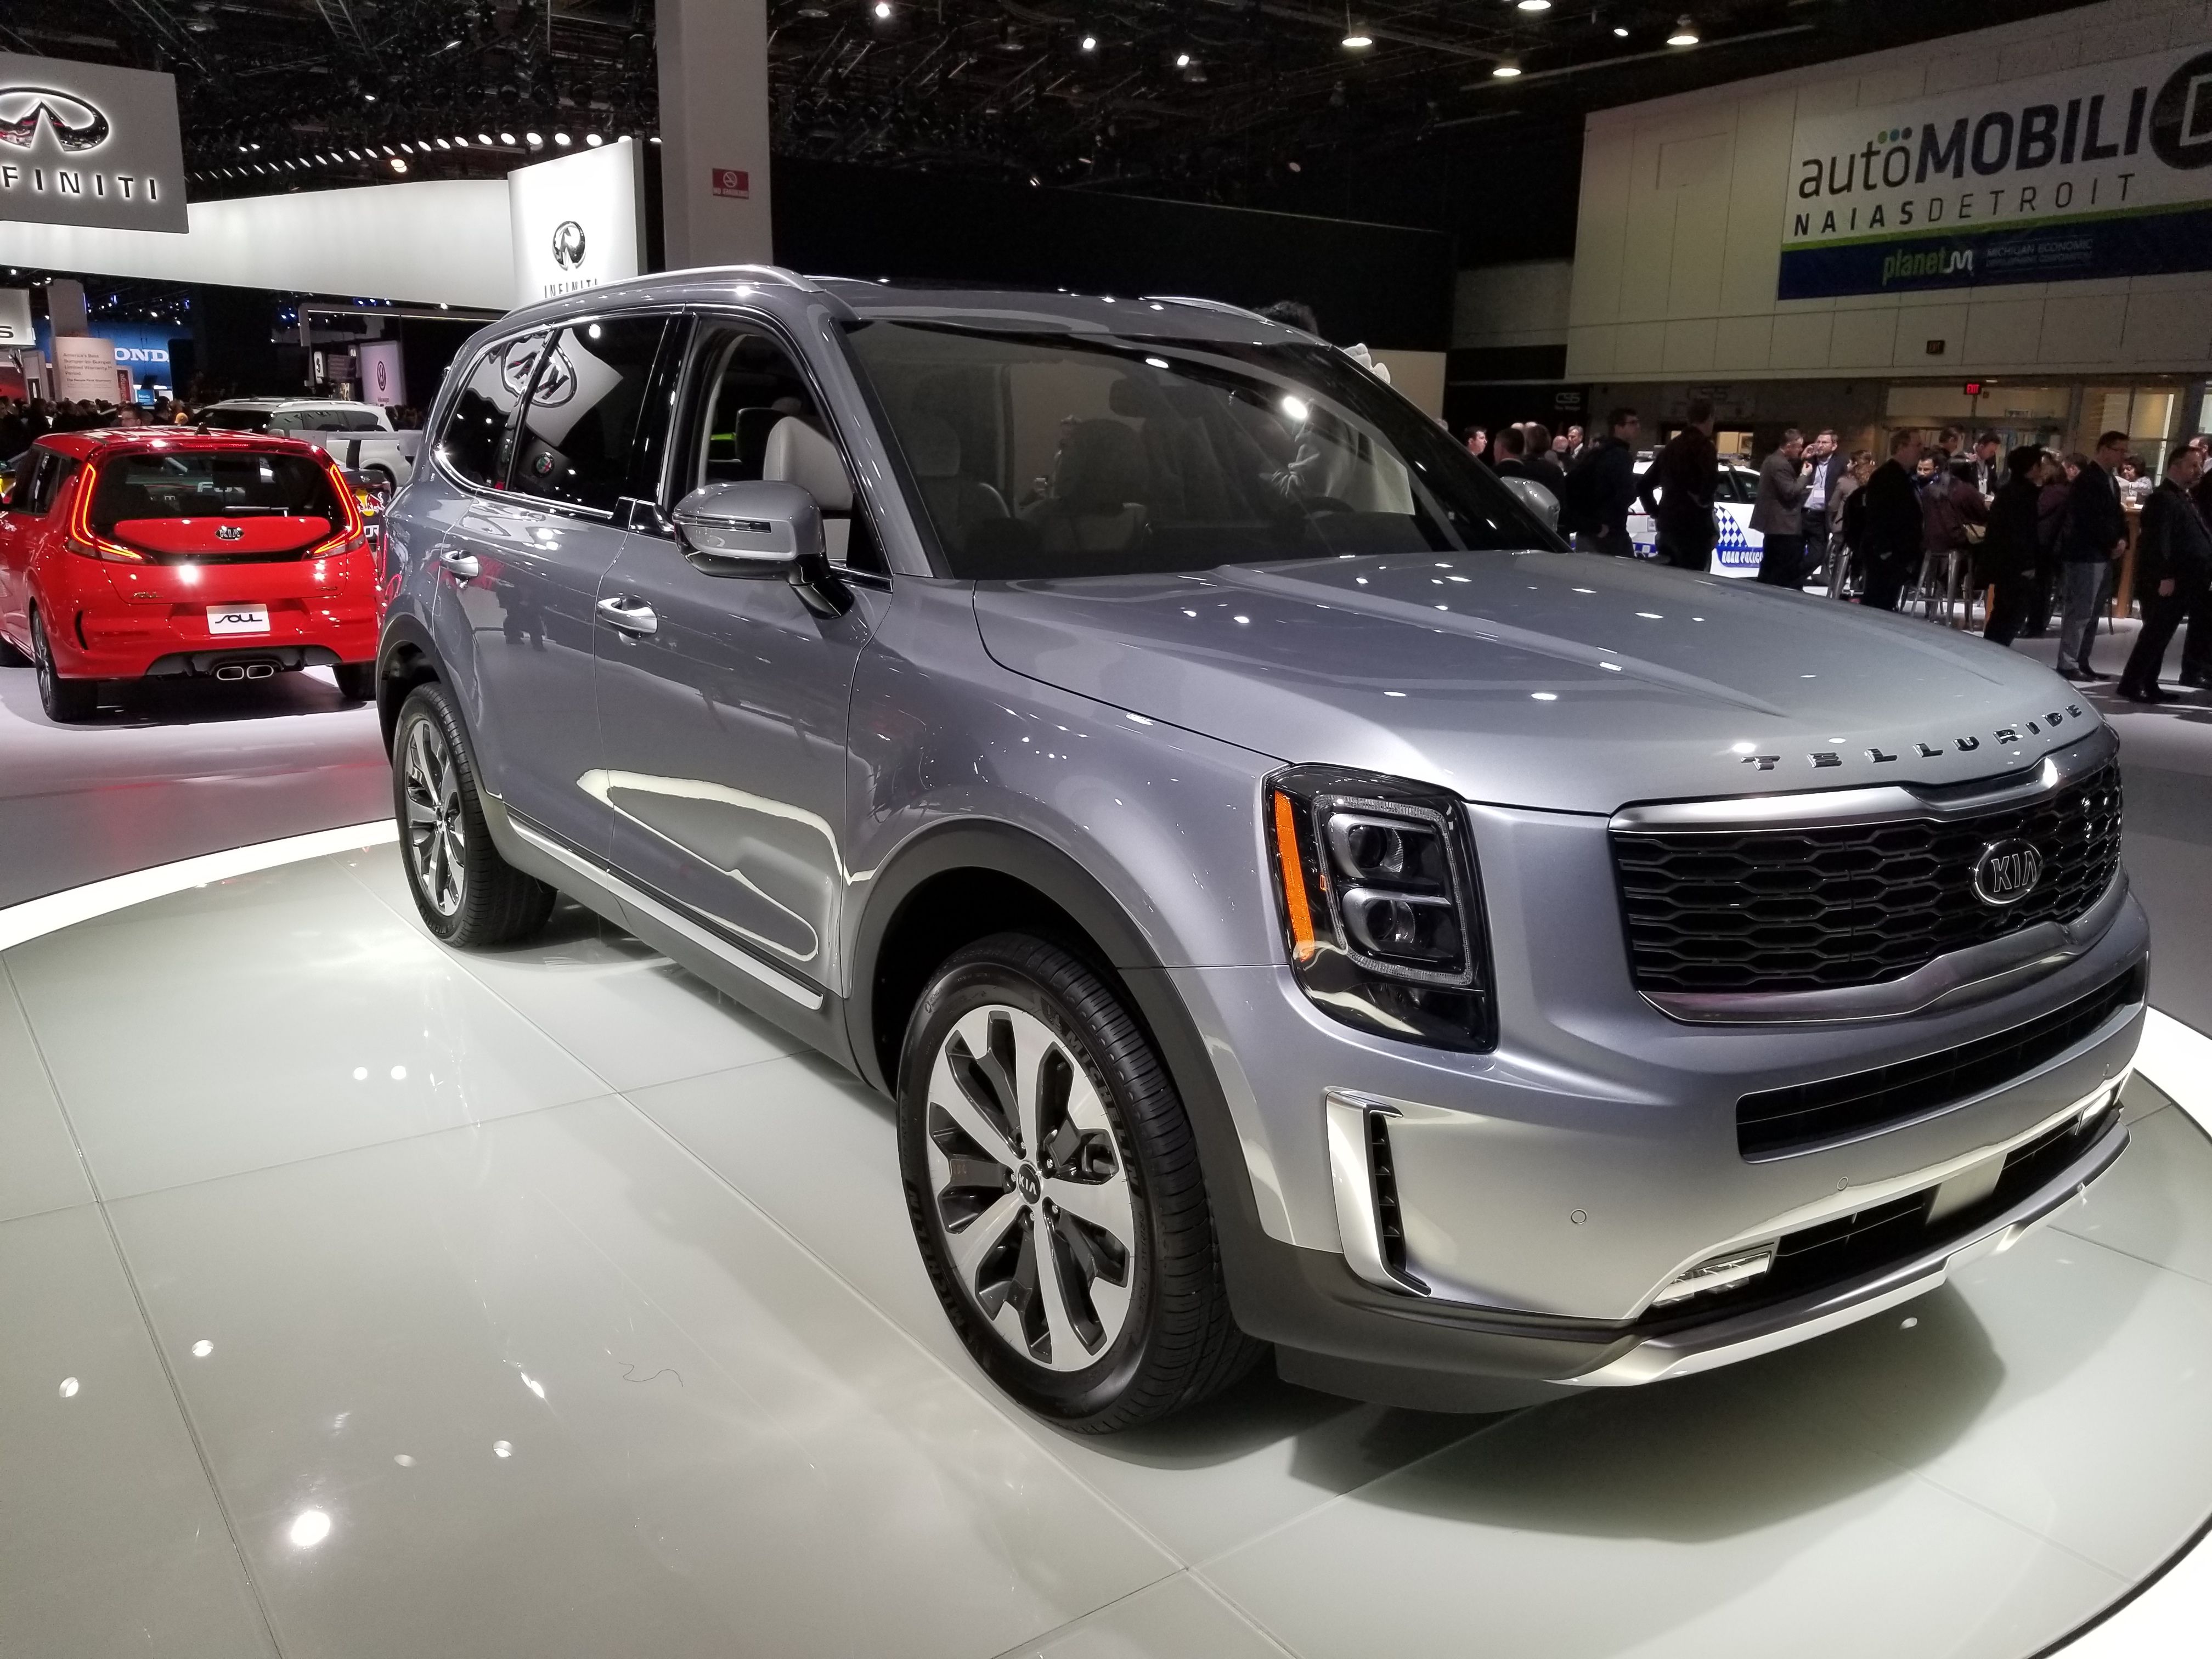 2019 2020 Kia Telluride finally shows its production form in Detroit